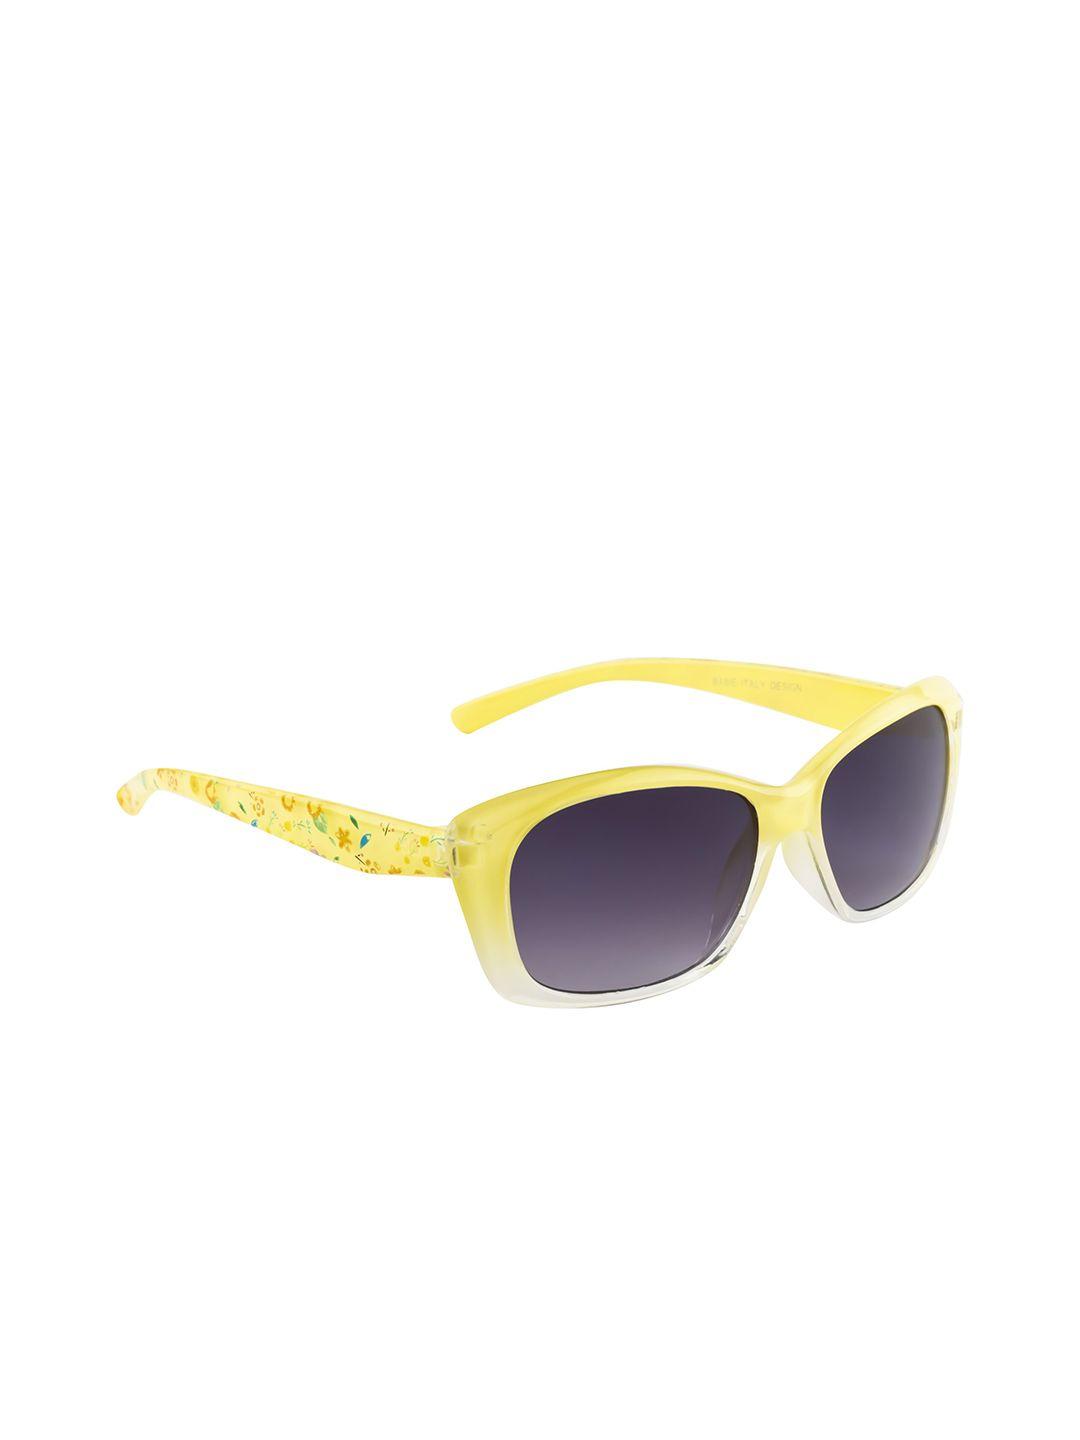 yk unisex kids square sunglasses with uv protected lens